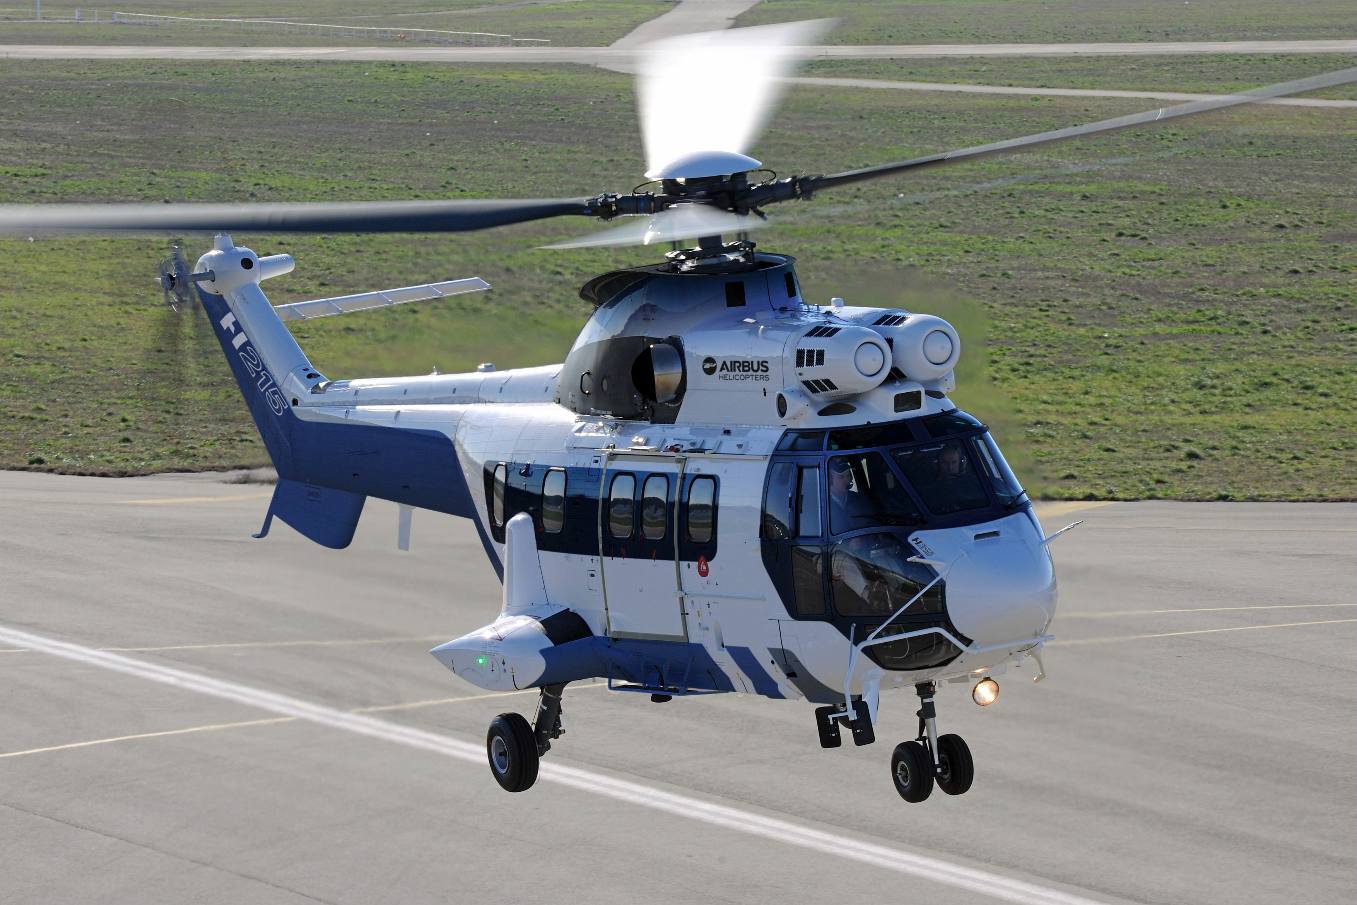 Paris 2017: Japanese orders for Airbus Helicopters